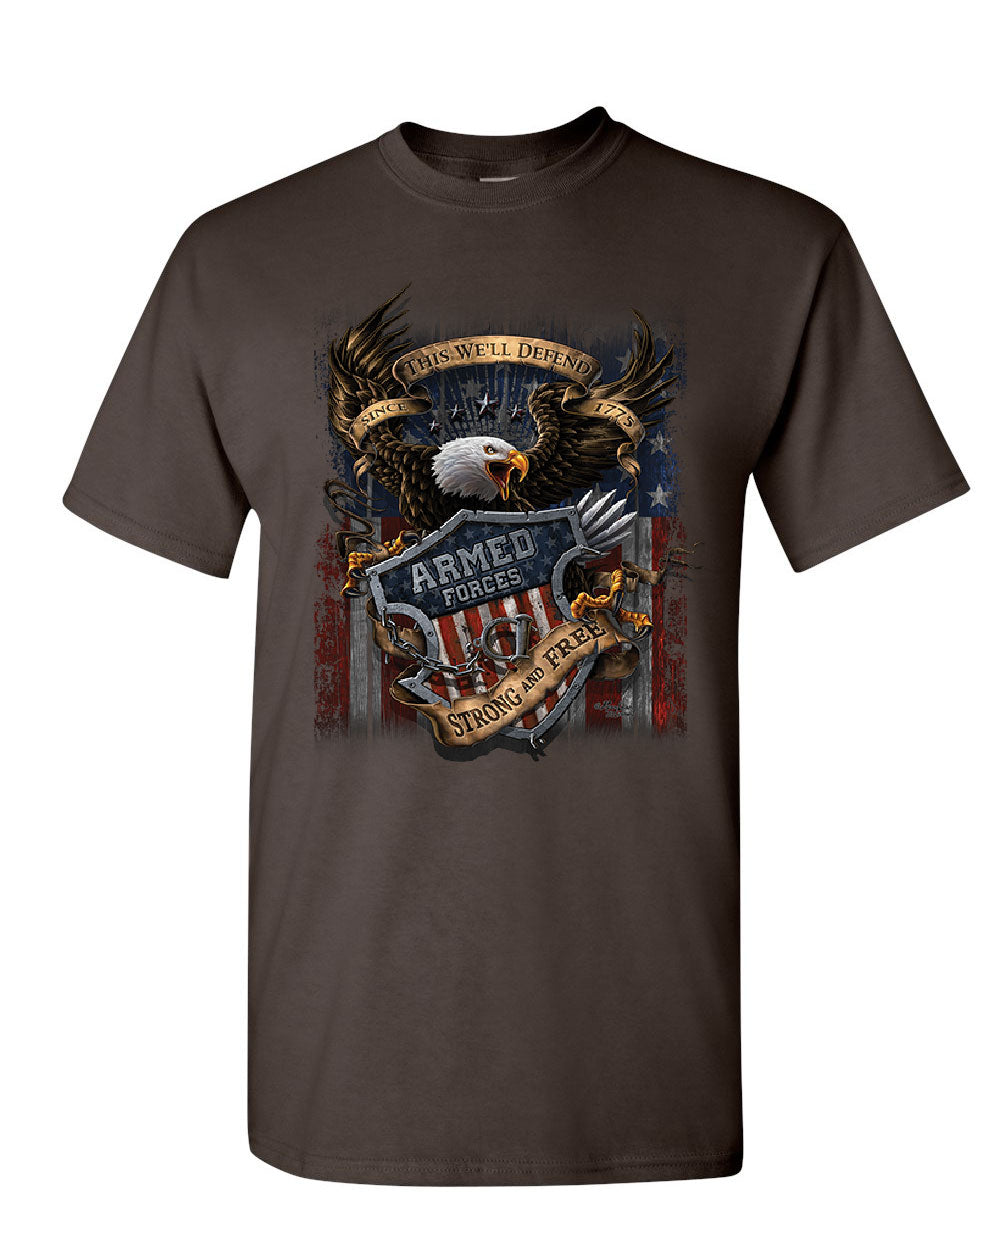 Armed Forces Bald Eagle T-Shirt Army This We'll Defend US Flag Mens Tee ...